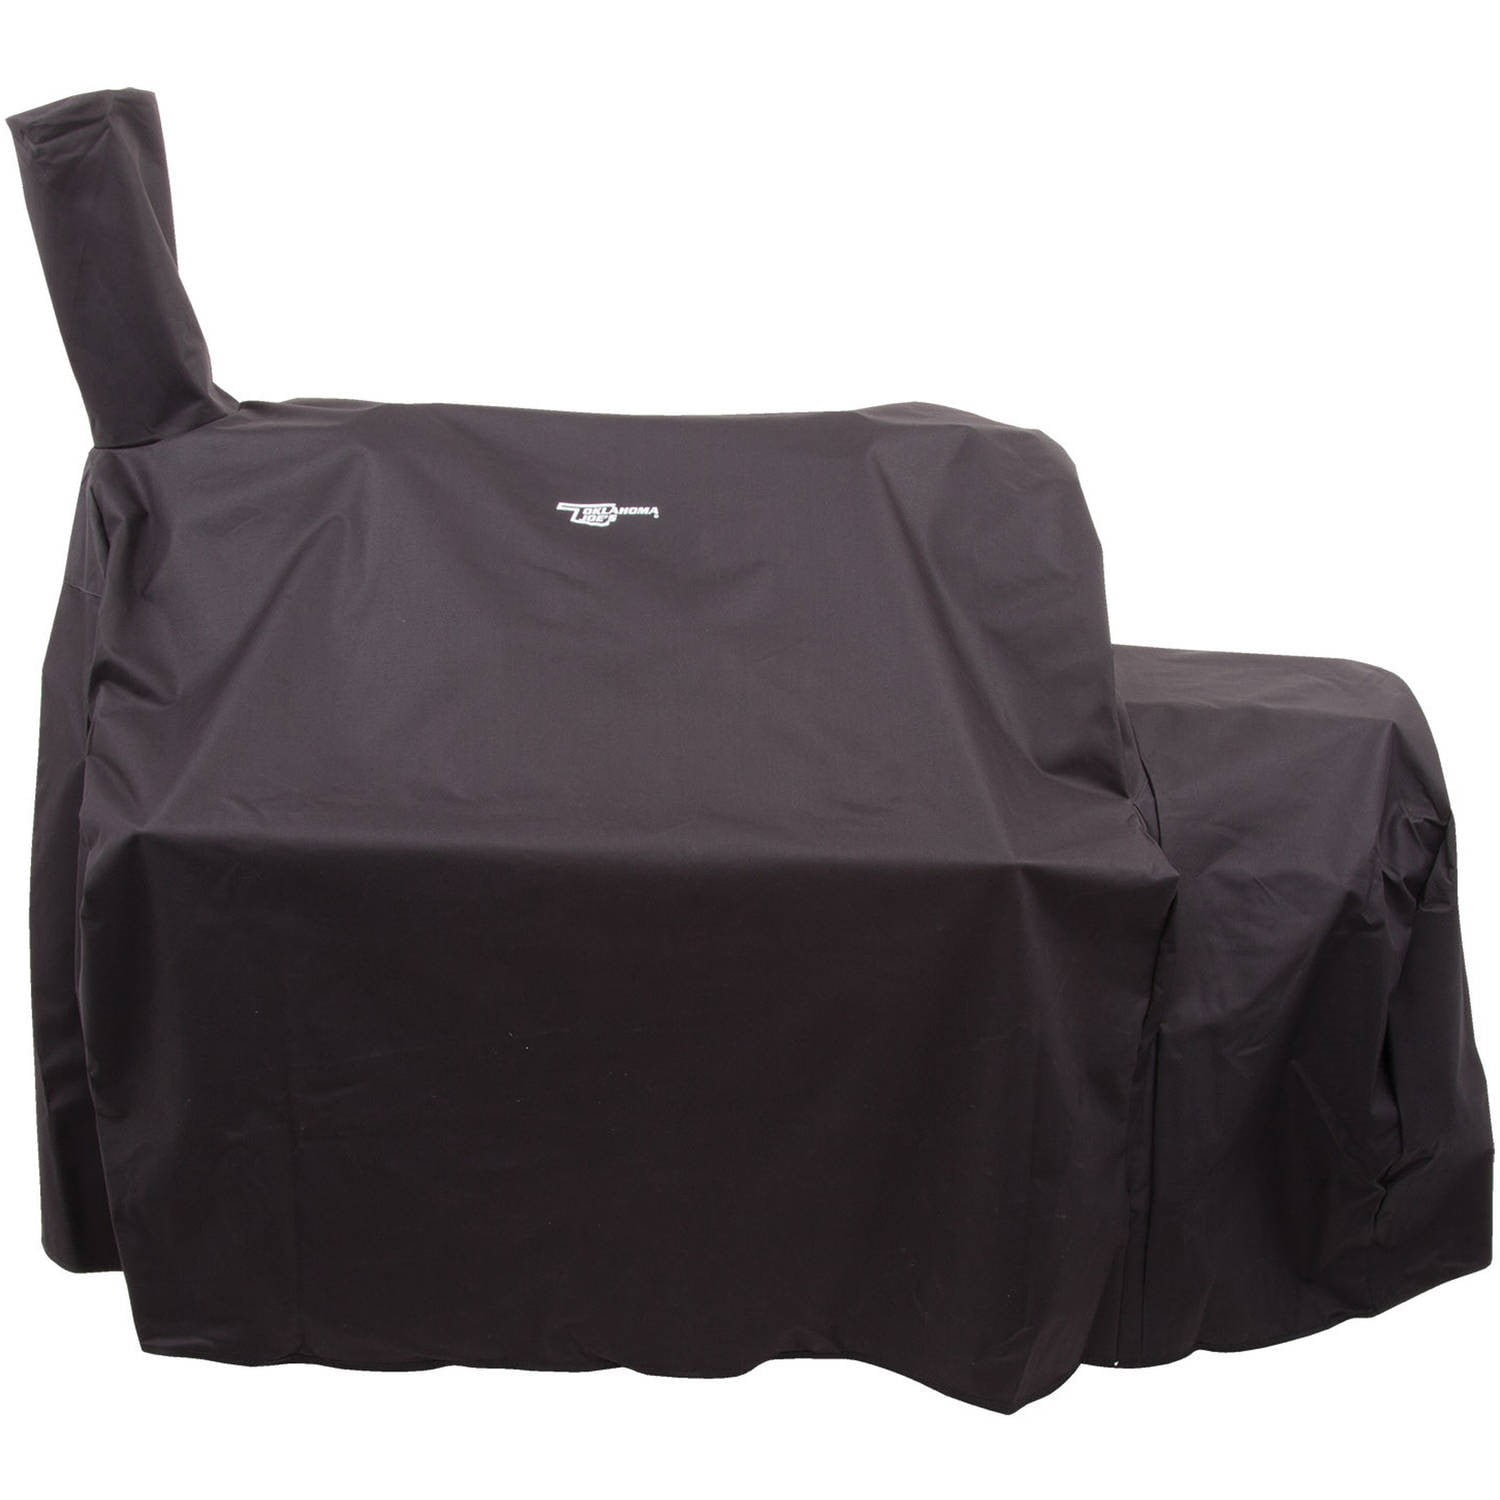 33.5 X 58.5 X 38 In. Black Grill Cover For Oklahoma Joes Highland Offset Smoker- Pack Of 4